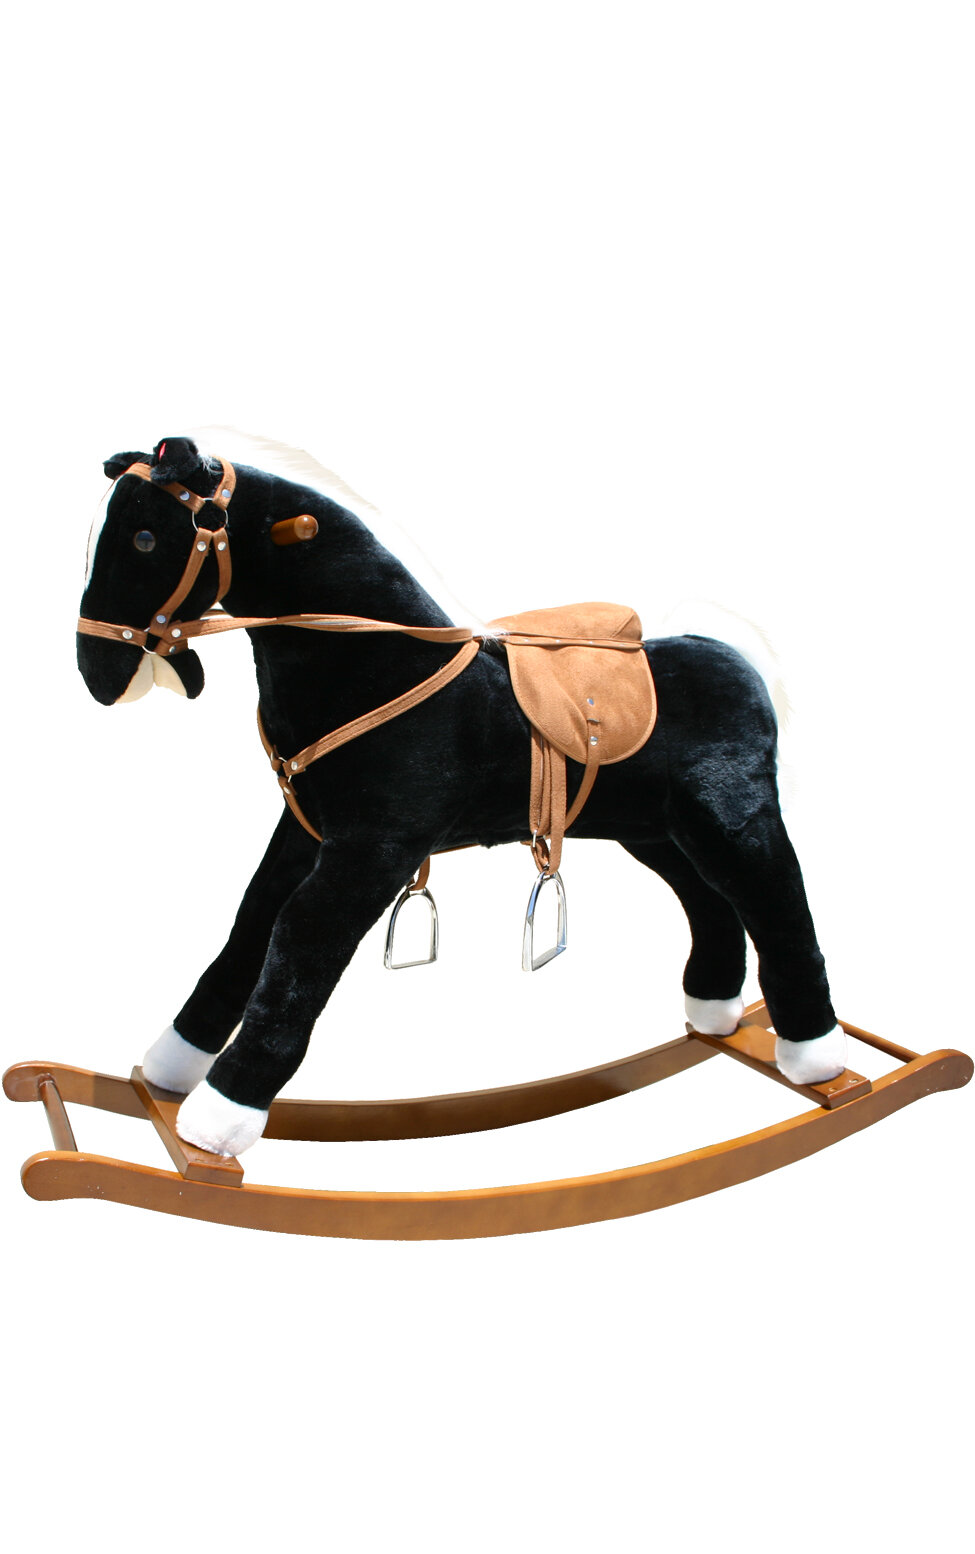 rocking horse with sound effects